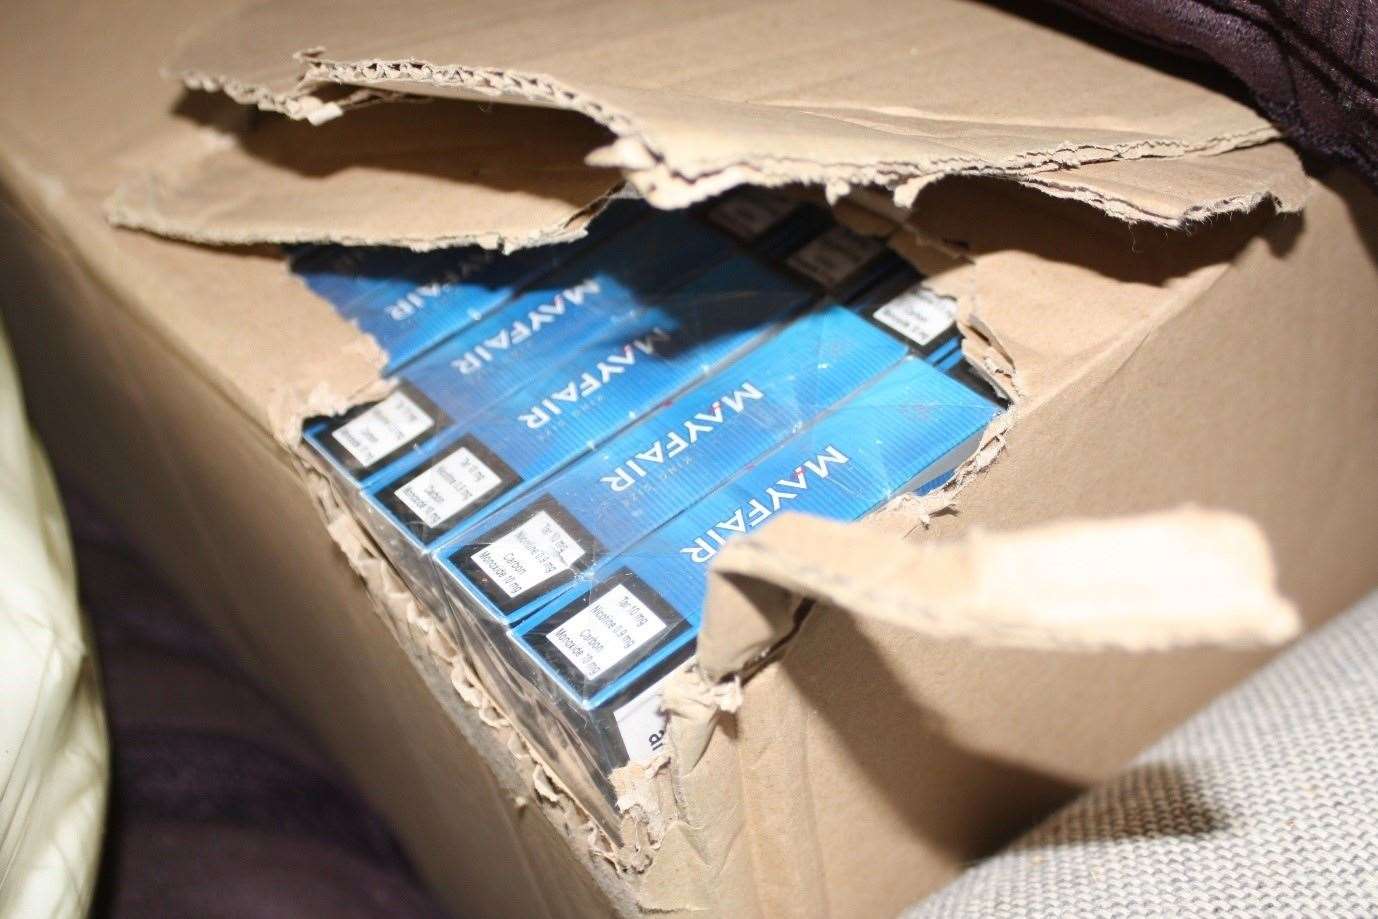 Counterfeit cigarettes found in Coulton's lorry